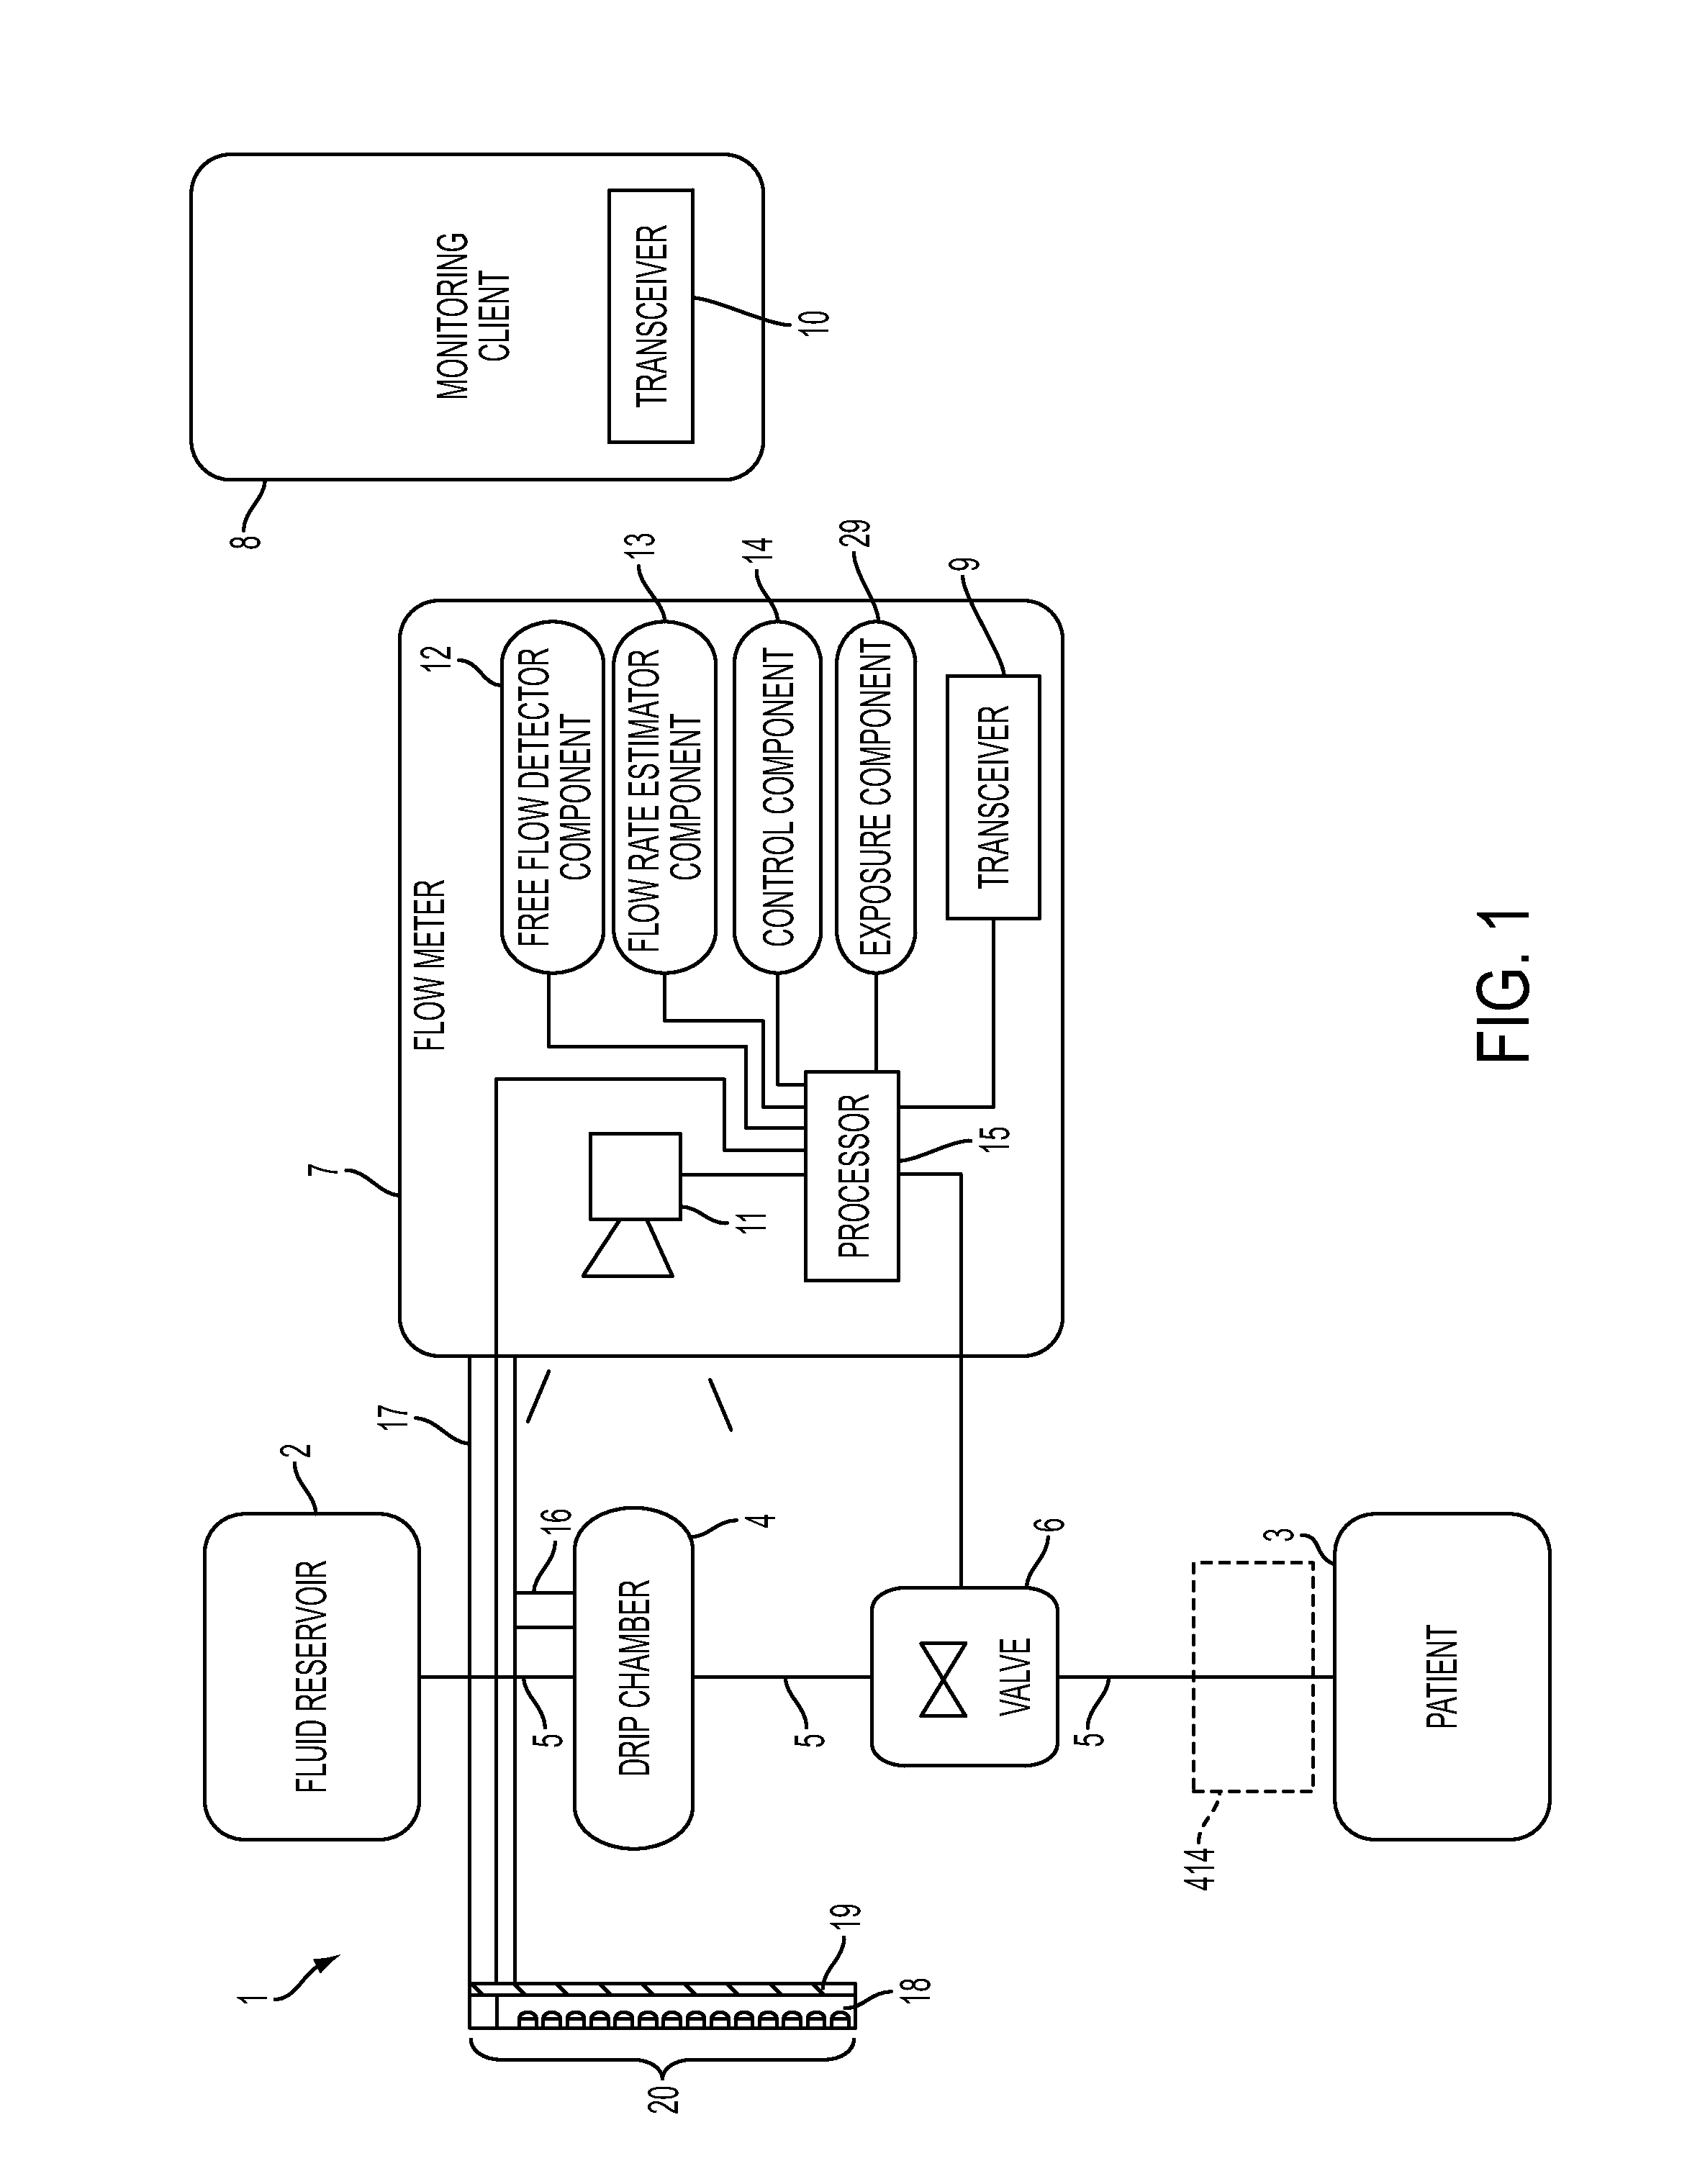 System, Method, and Apparatus for Monitoring, Regulating, or Controlling Fluid Flow